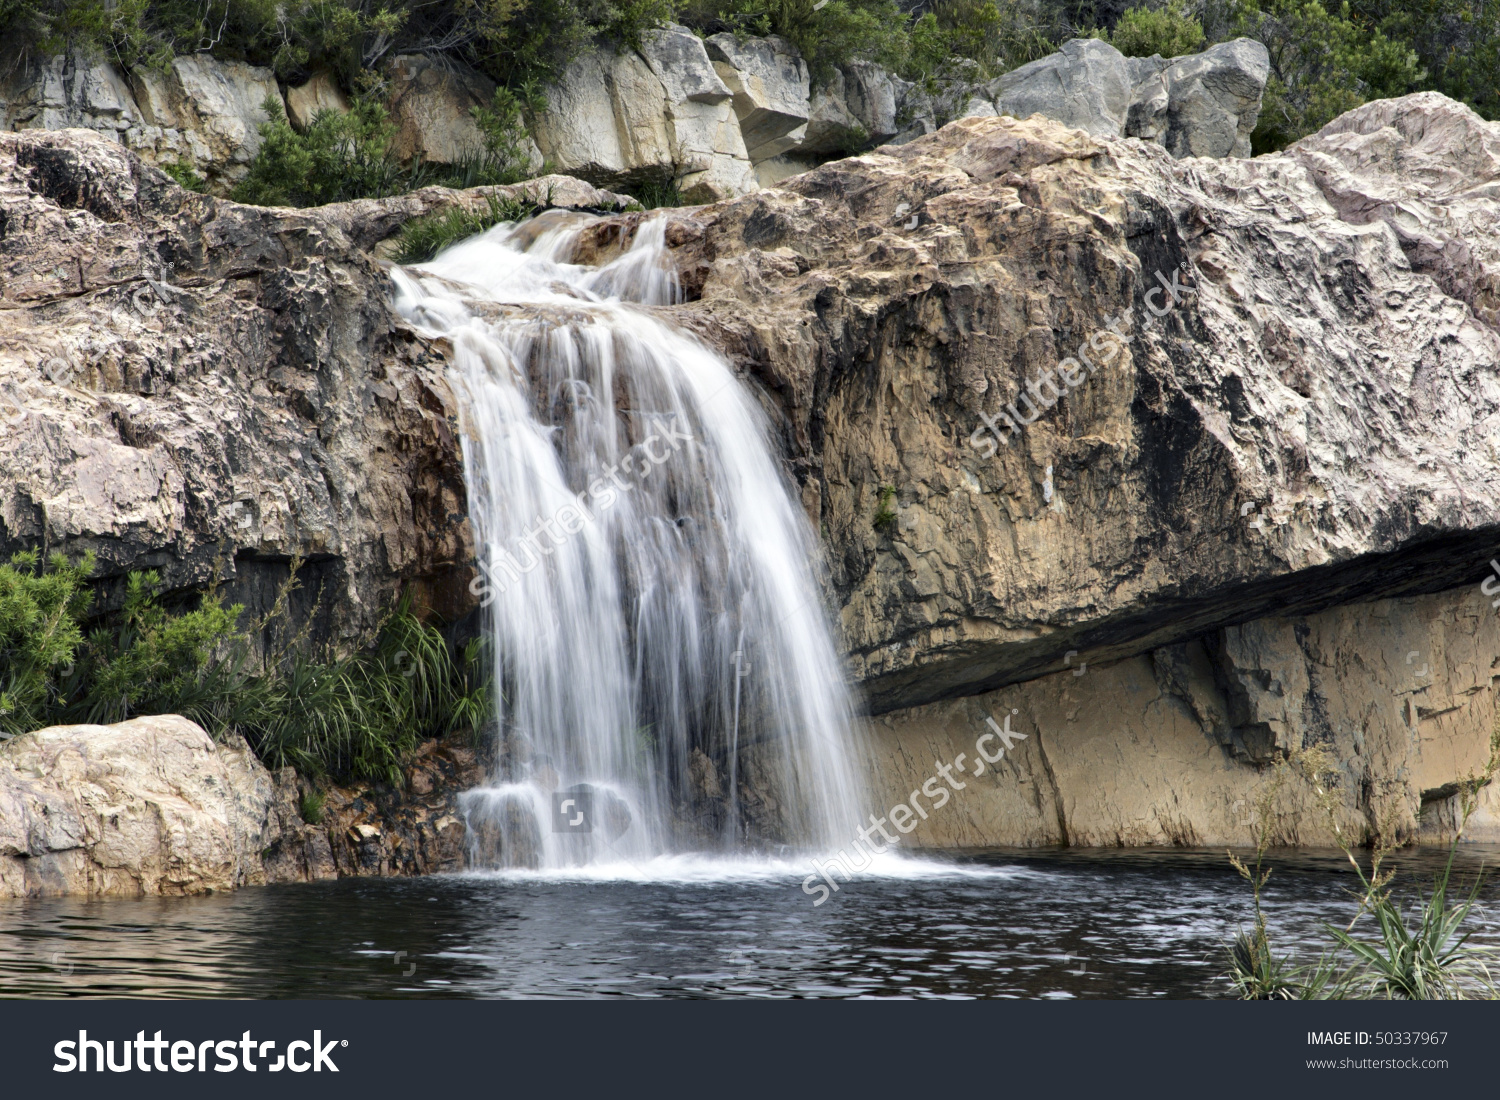 A Waterfall At Beaverlac In The Cederberg Mountains On The Farm.